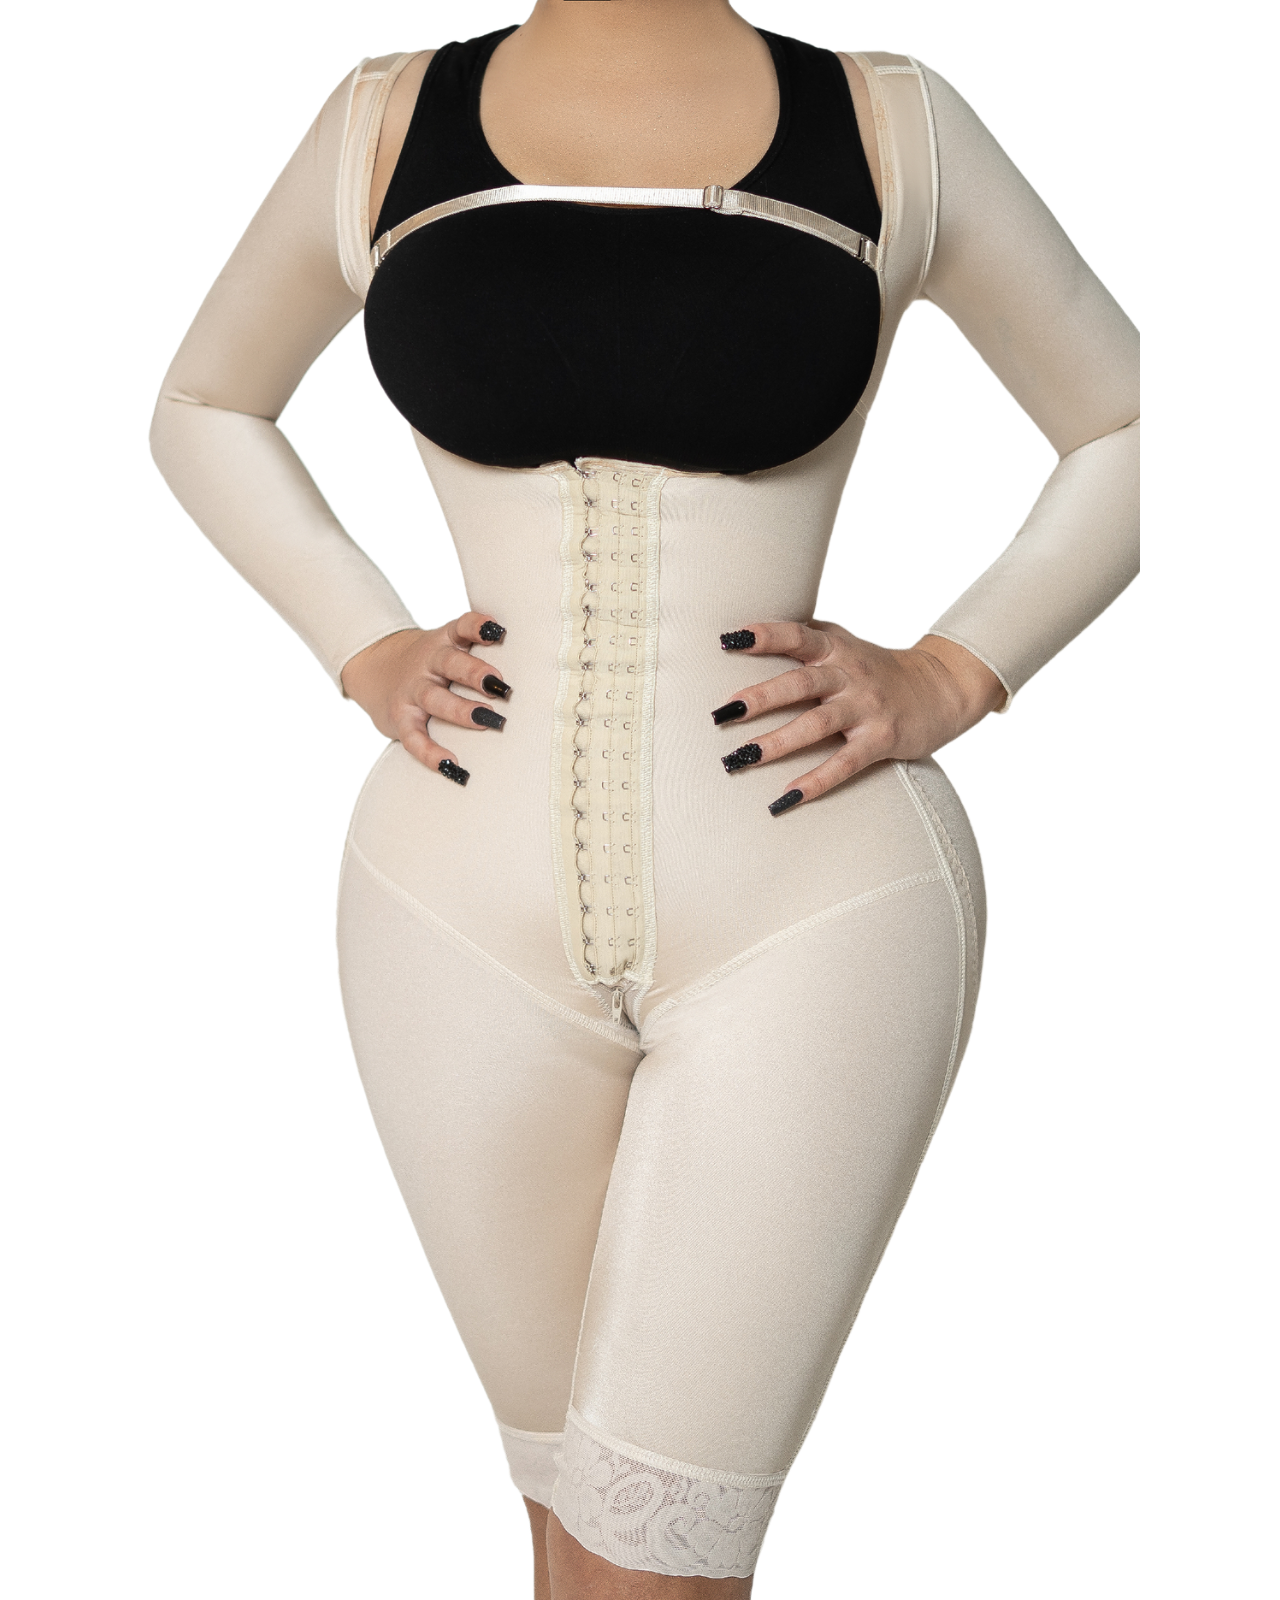 CHICCURVE : best shapewear solutions, available in a wide range of